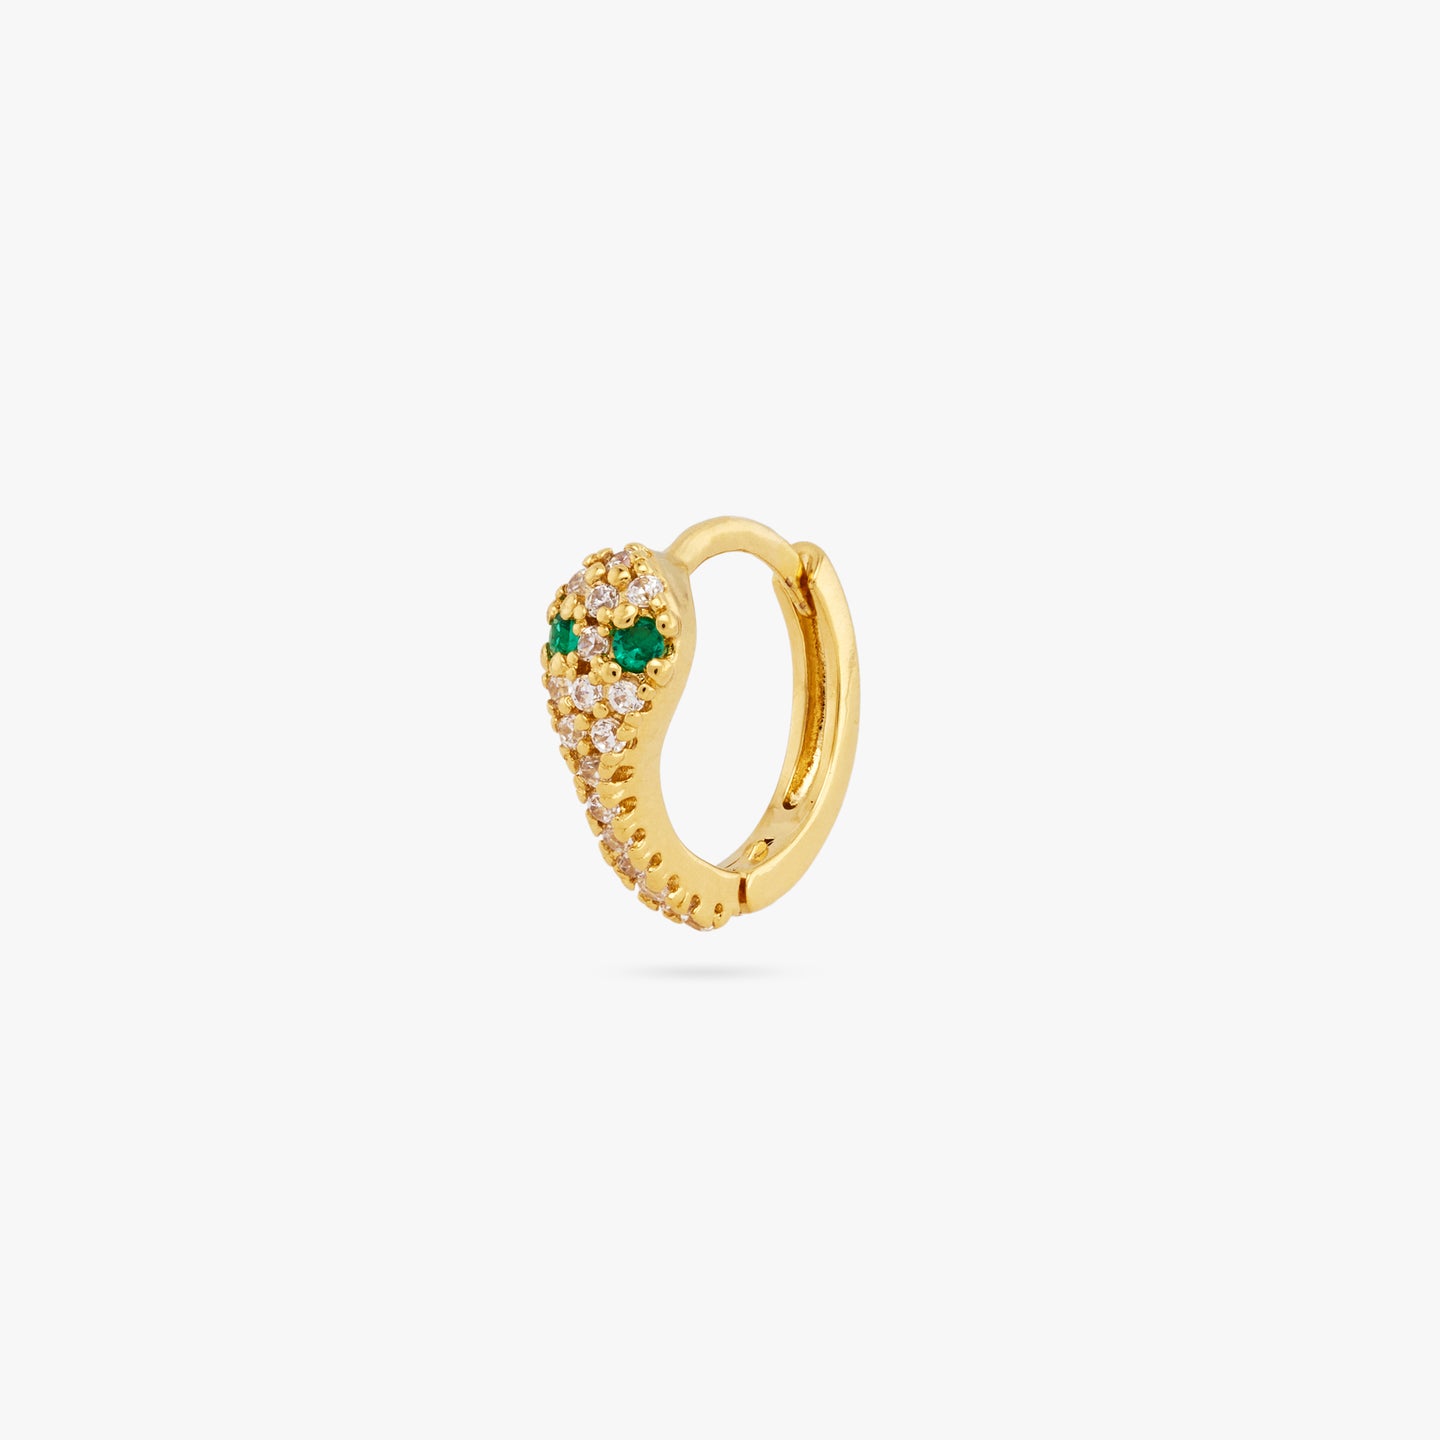 This is a gold, pave lined and serpent shaped huggie earring with green CZ eyes color:null|gold/clear